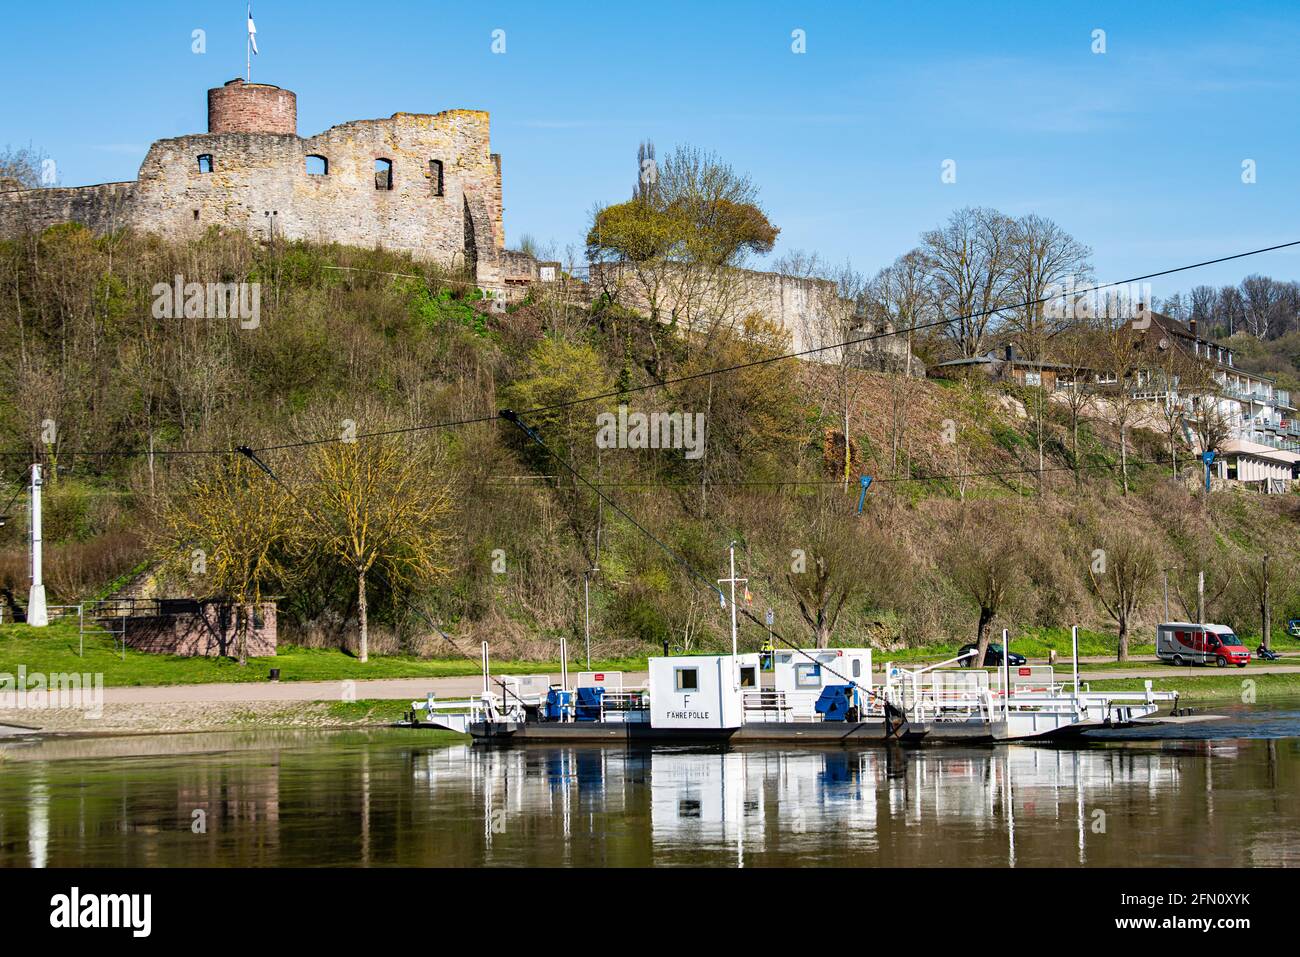 Polle, Germany. 21st Apr, 2021. The Polle yaw rope ferry, operated by the district of Holzminden, travels on the river Weser below the ruins of Polle Castle. The Weser ferry operates between the village of Polle and the district of Heidbrink. Credit: Swen Pförtner/dpa/Alamy Live News Stock Photo